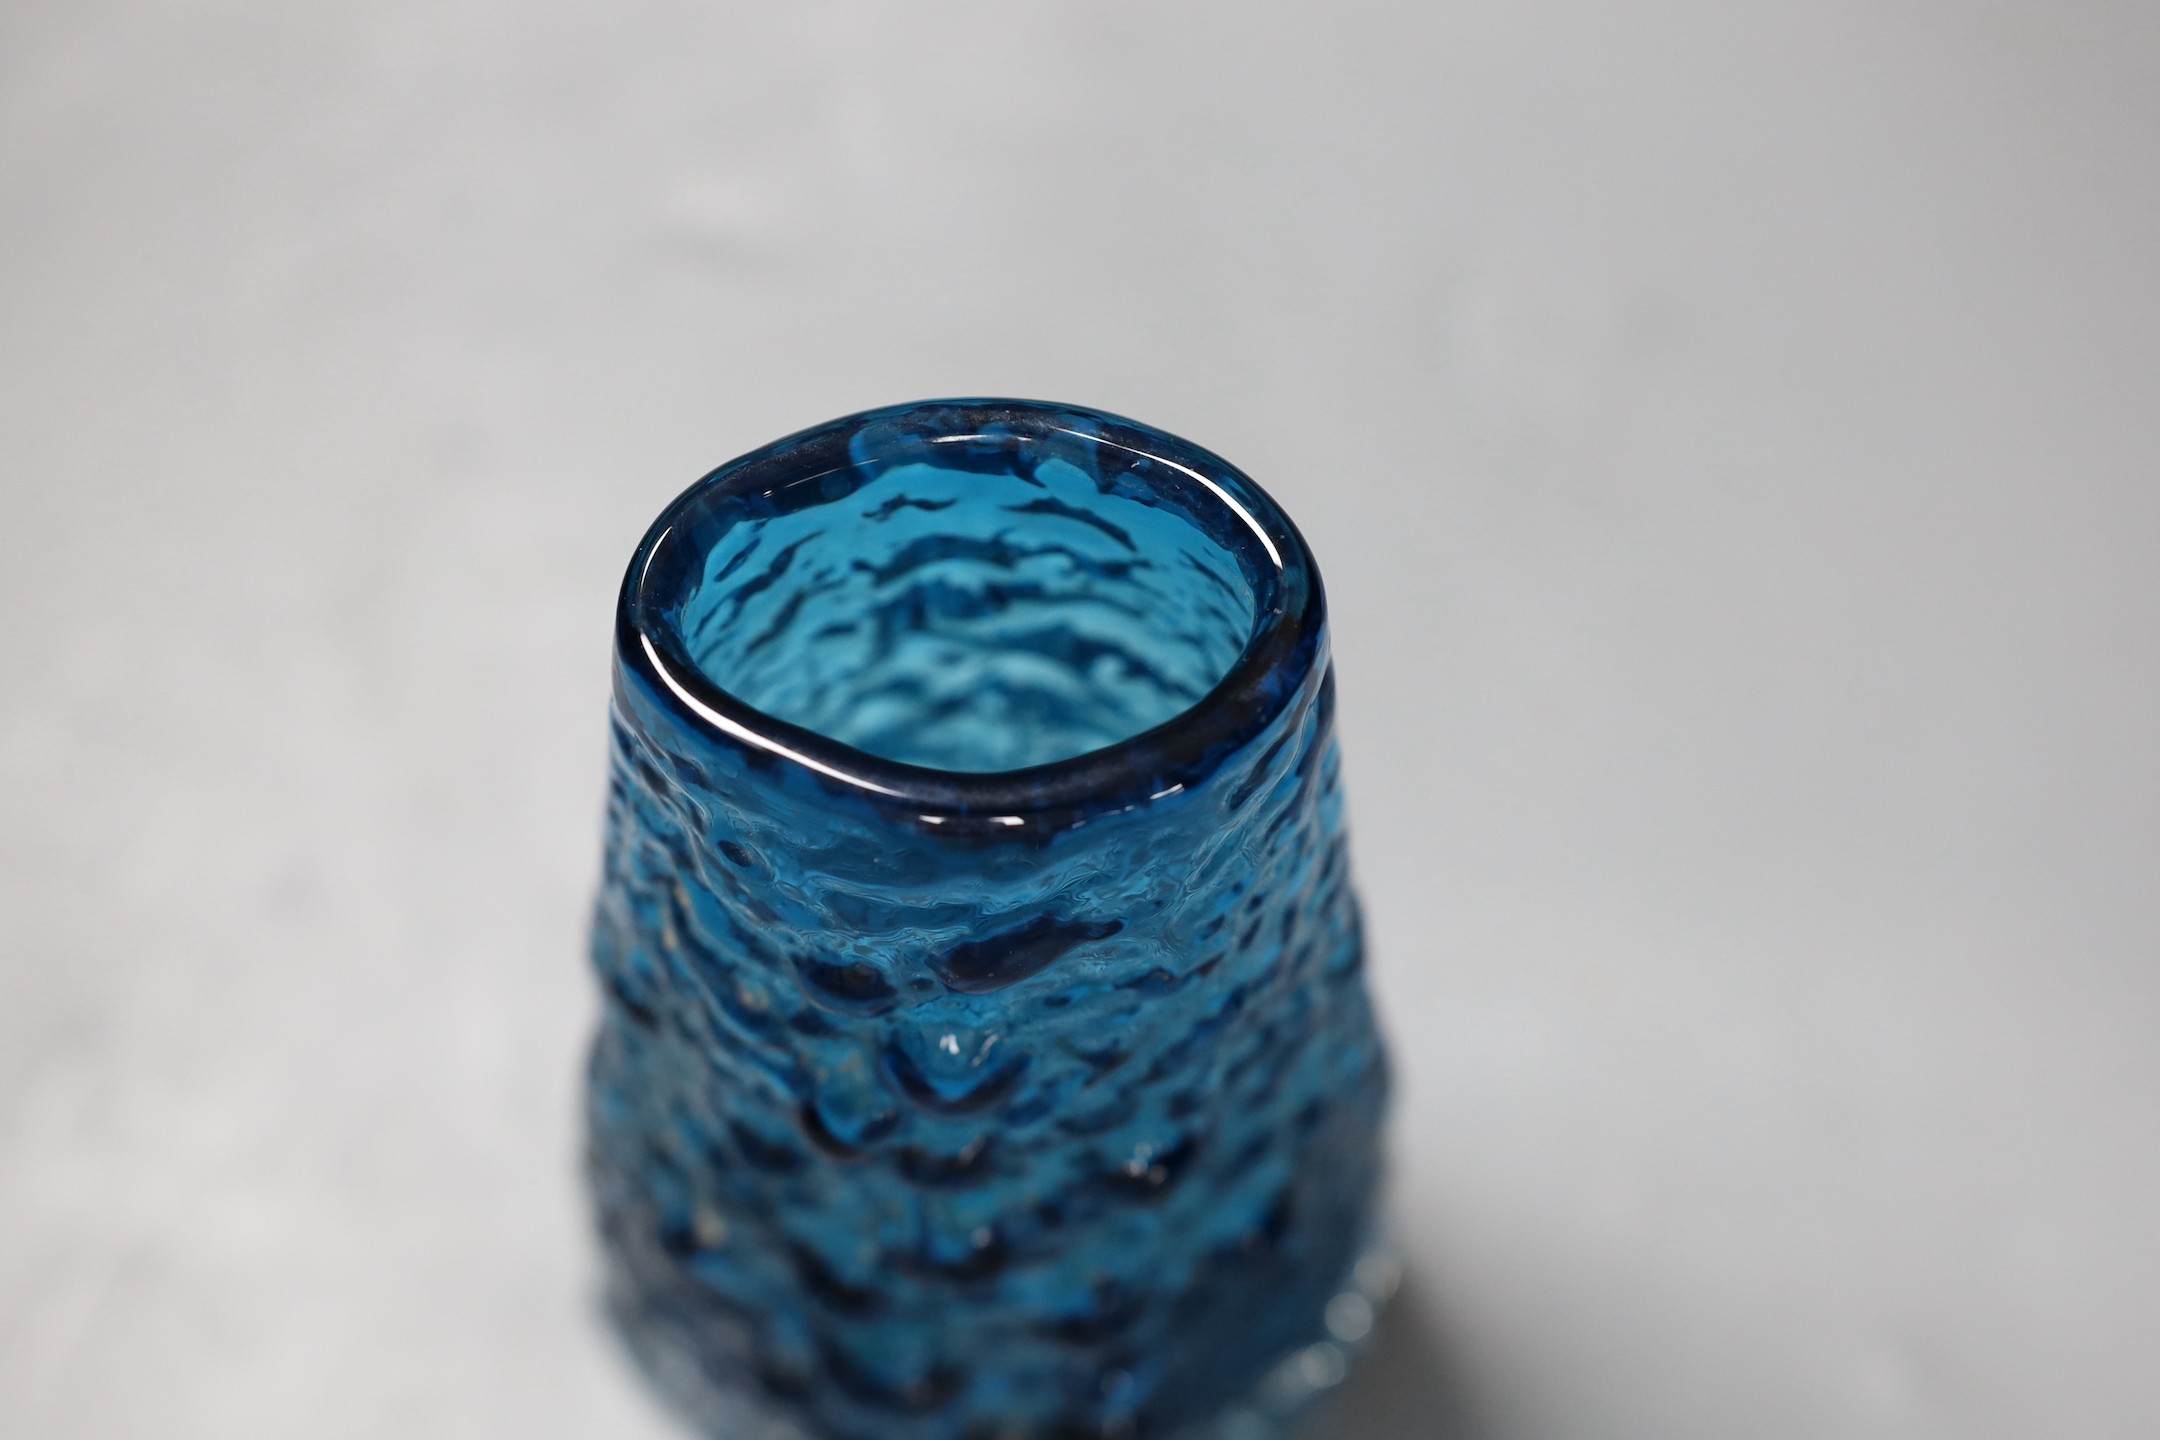 A Whitefriars Volcano vase , designed by Geoffrey Baxter, model 9717, in kingfisher blue glass